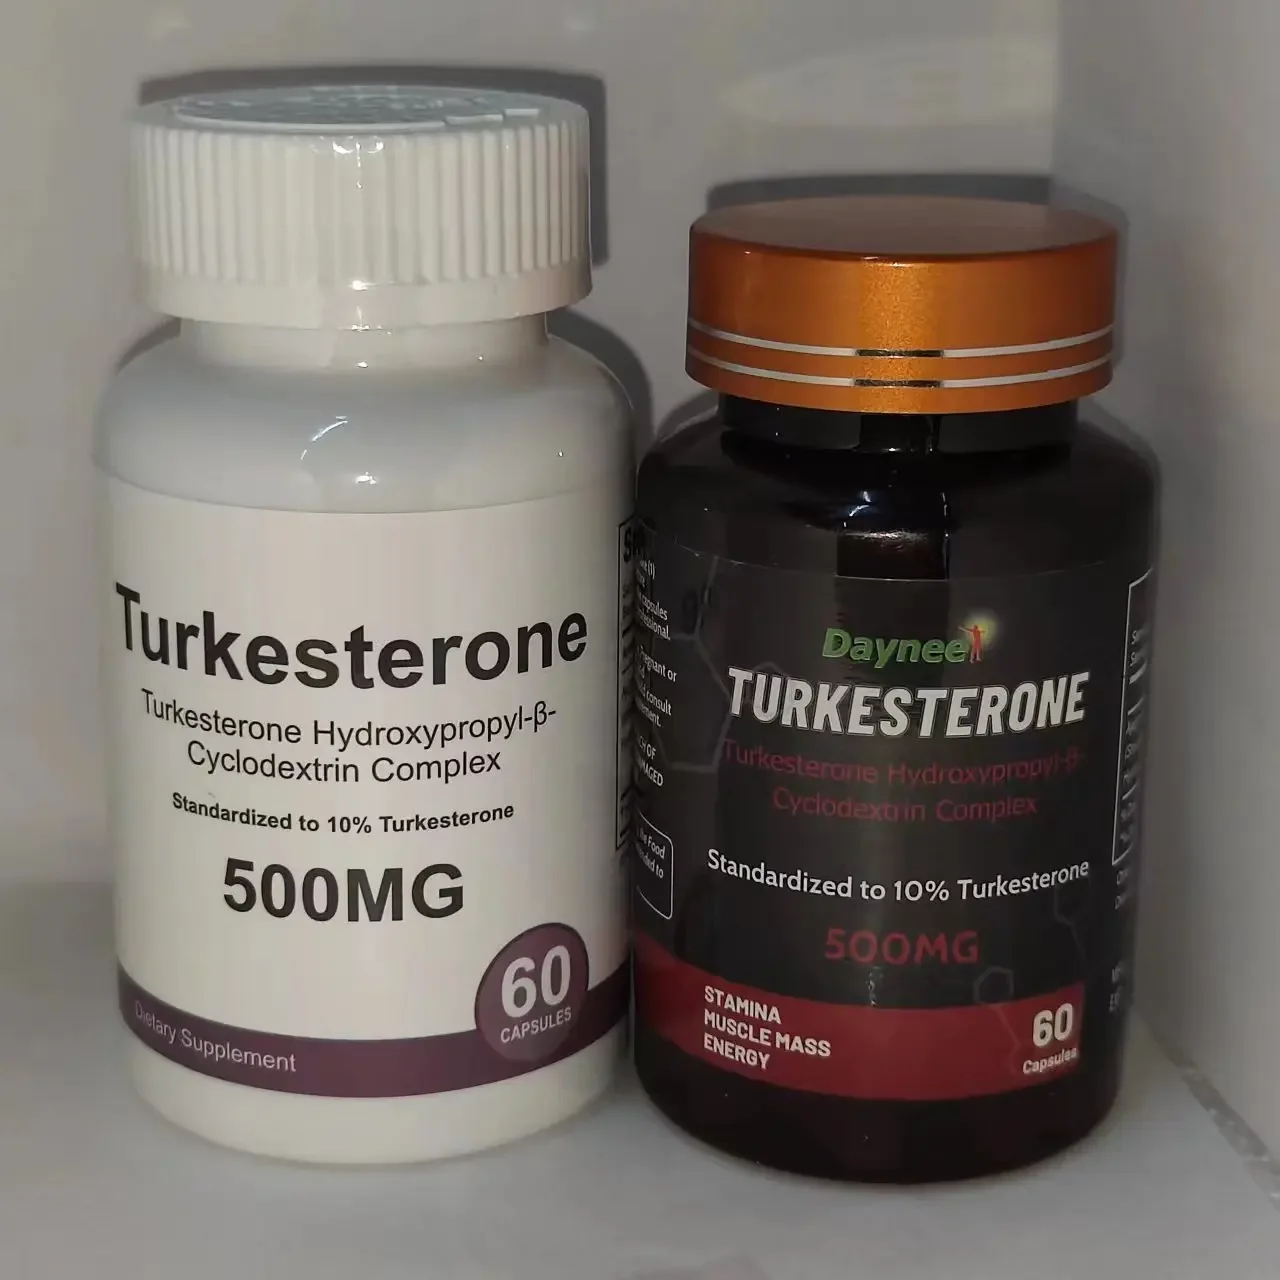 

500Mg Turkesterone Capsules 10% Dietary Supplement Helping Increase Muscles and 1Bottle Turkesterone Capsule Energy Levels